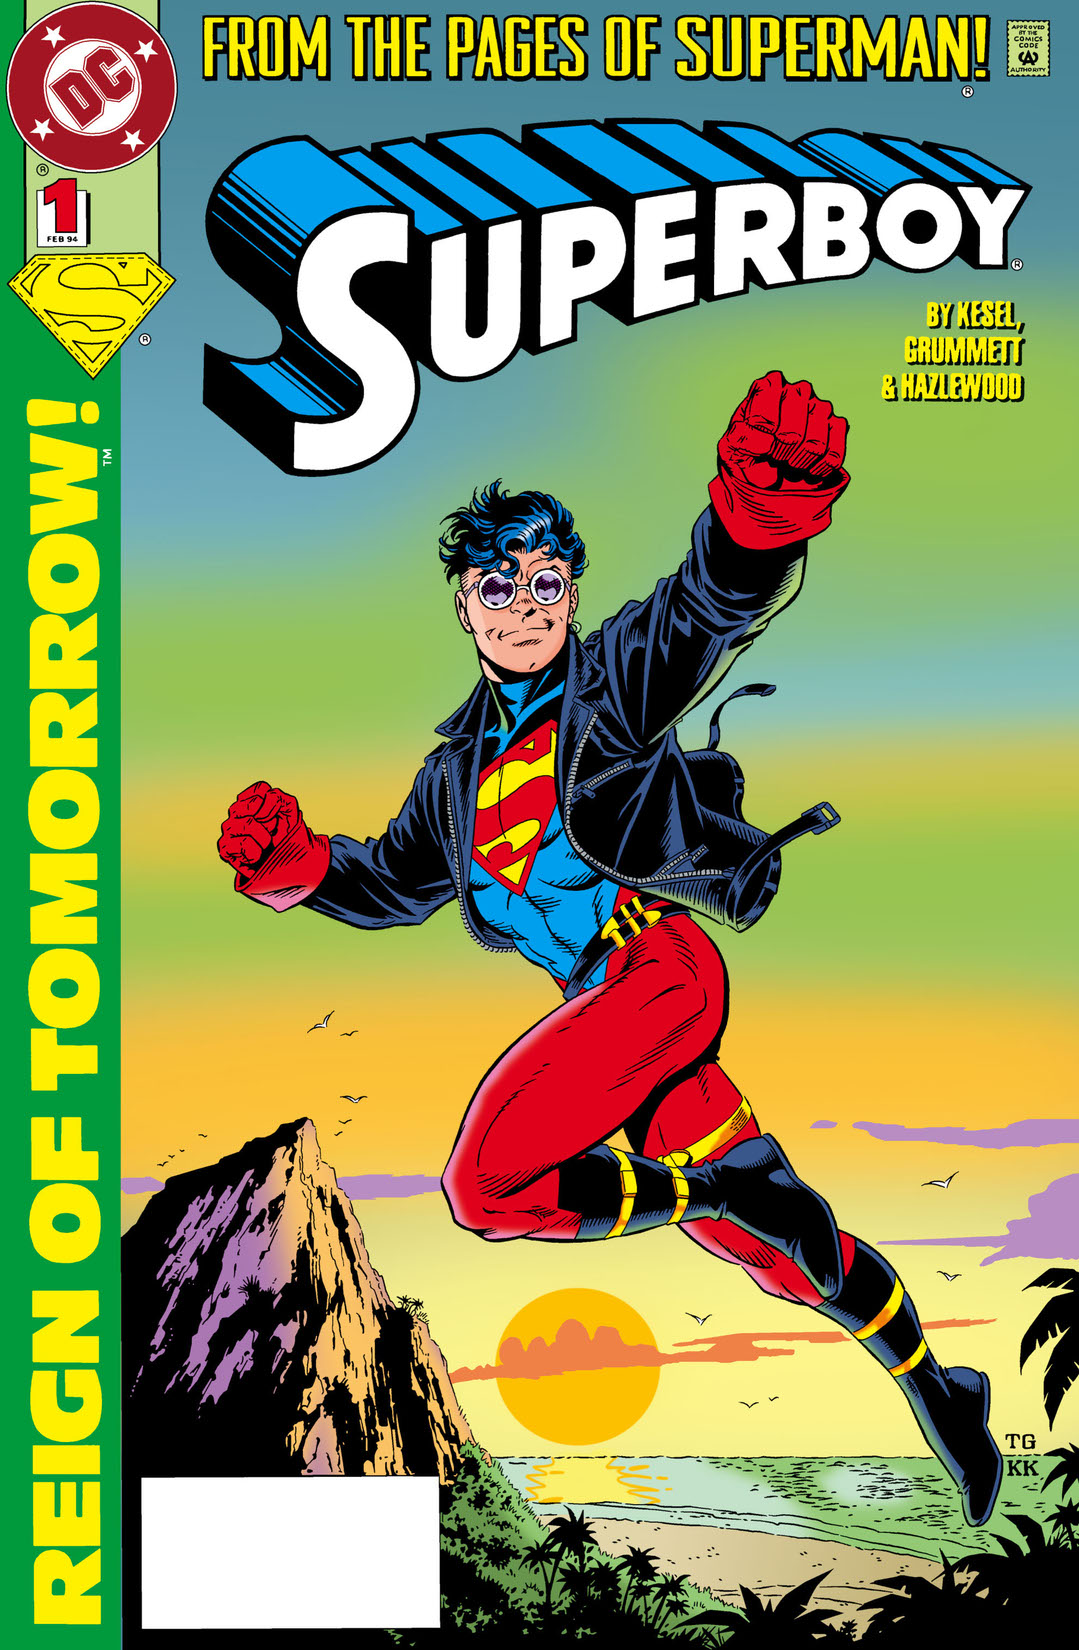 Superboy (1993-) #1 preview images